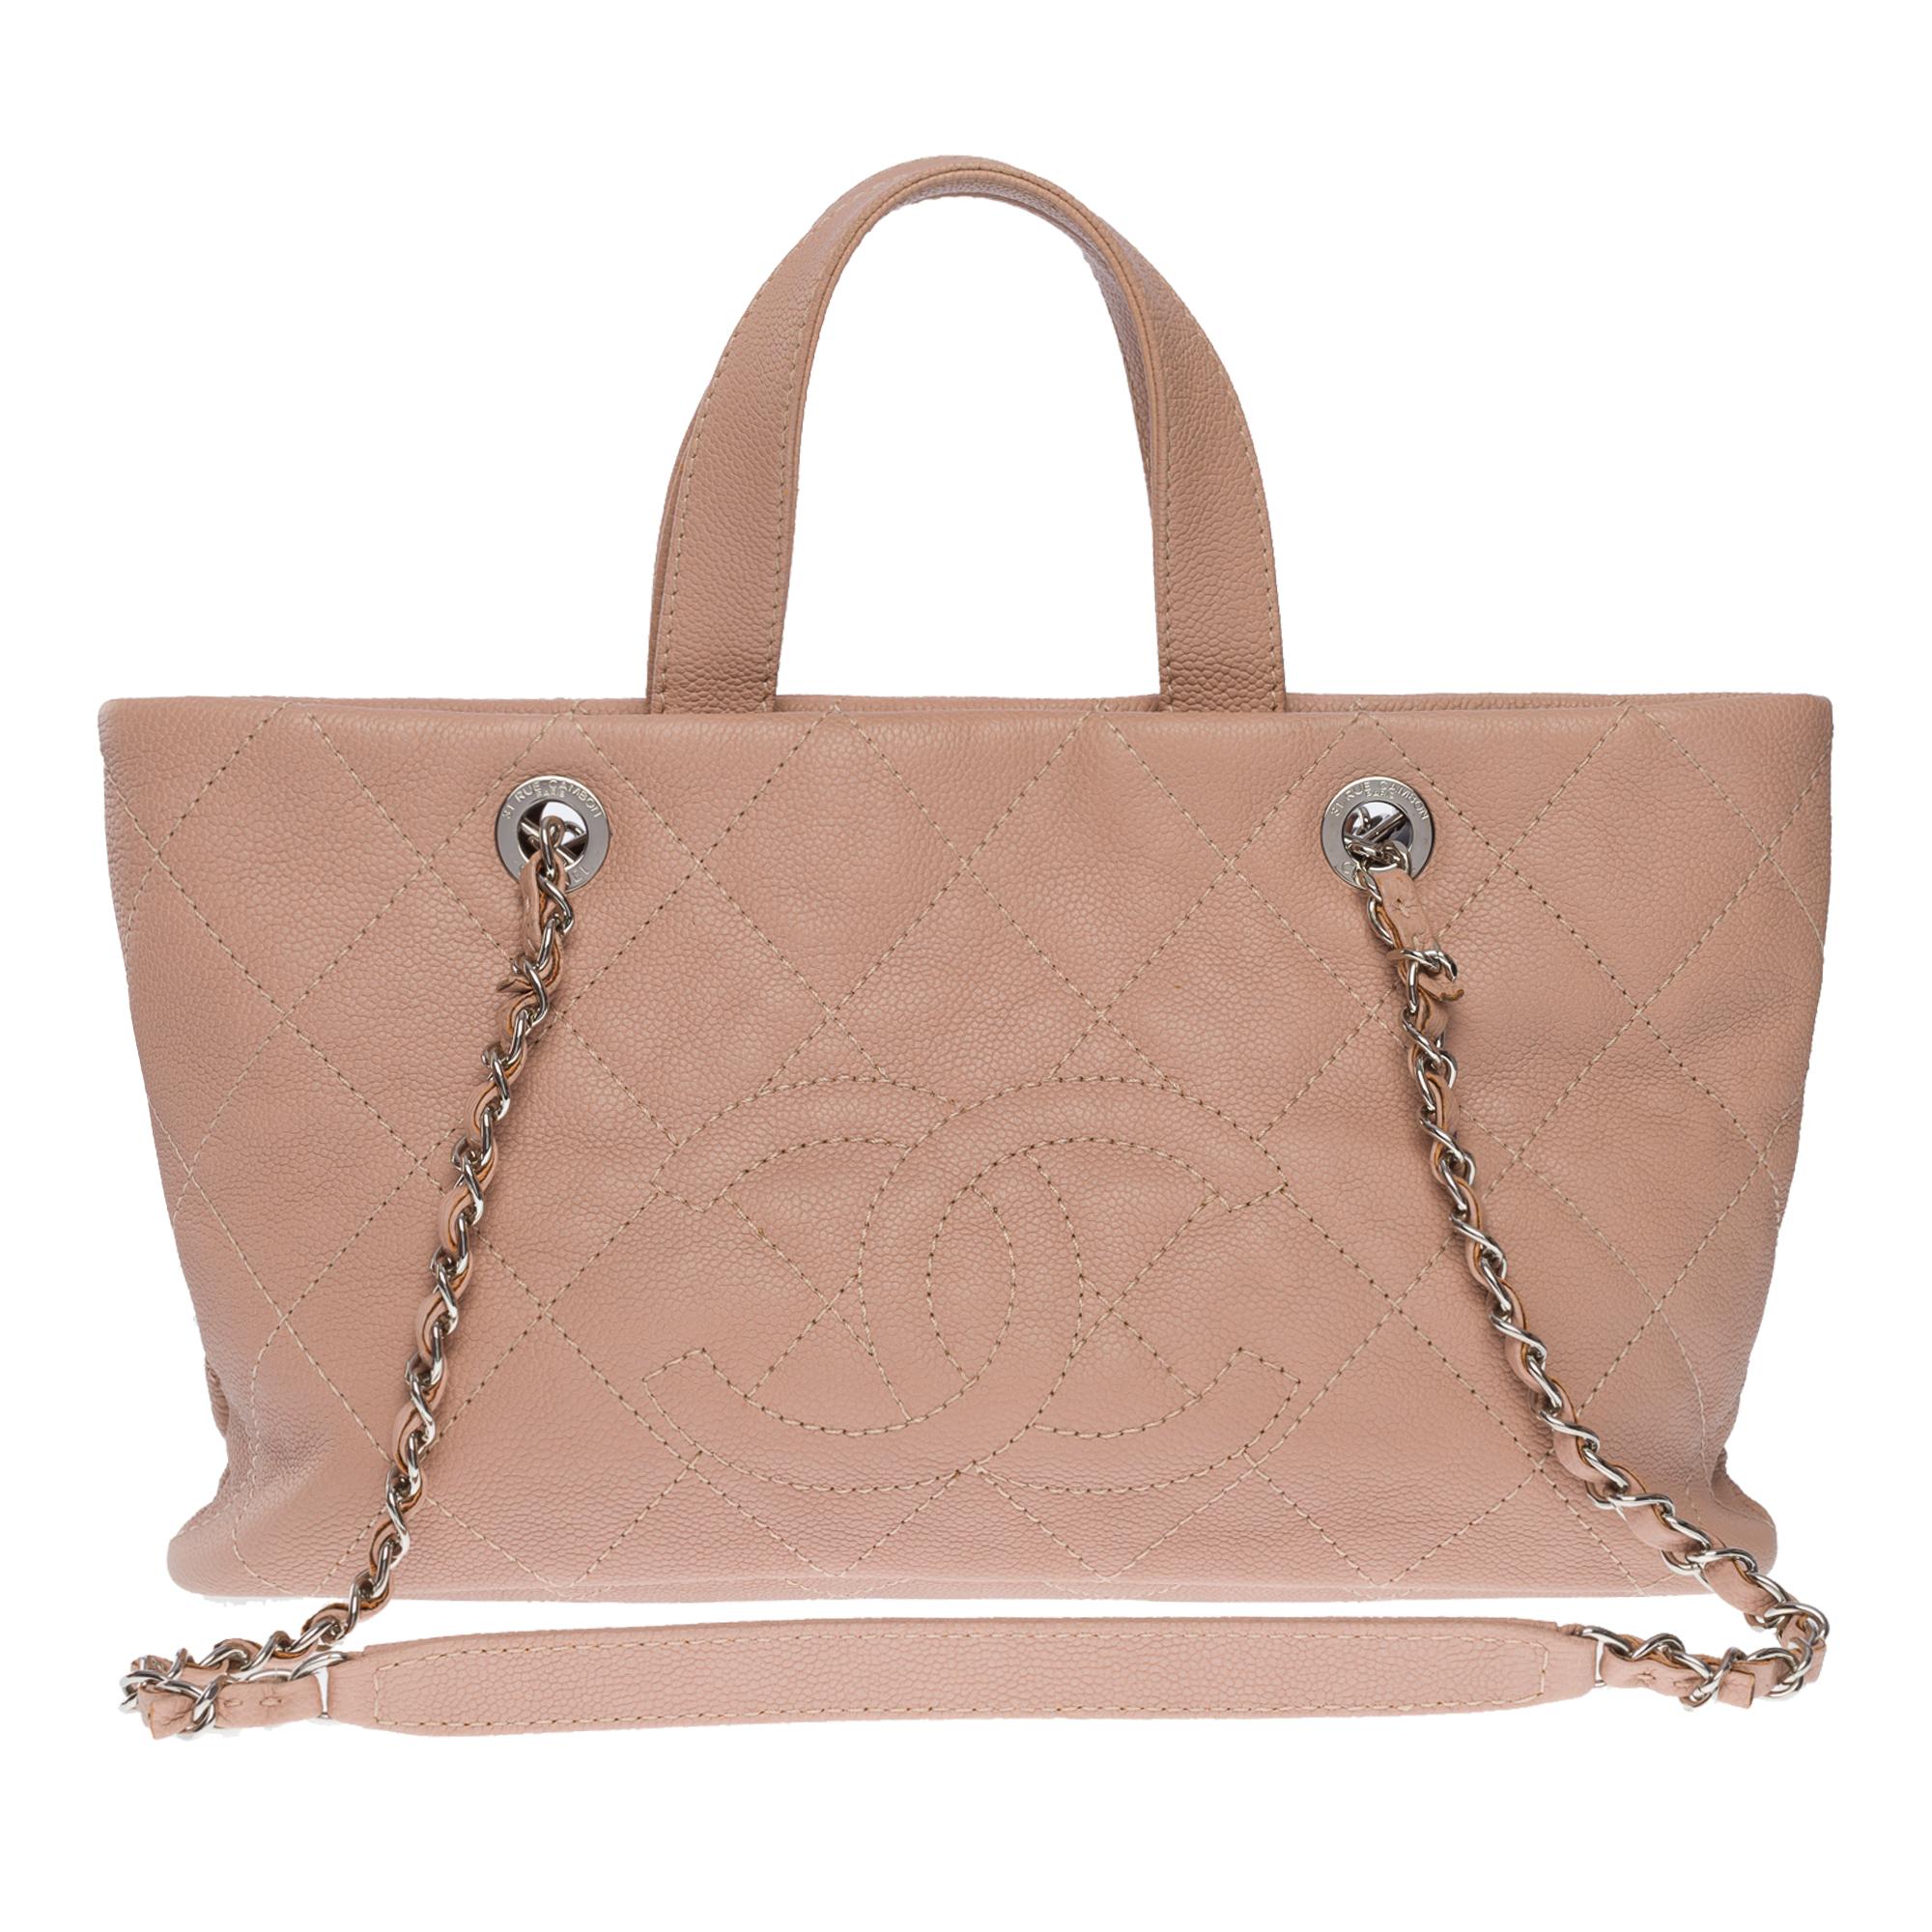 Gorgeous Chanel Mini shopping Tote bag in pink caviar leather, silver metal hardware, double pink leather handles and a silver metal chain handle interwoven with pink leather for a hand and shoulder support

Closure by silver magnet
A zippered